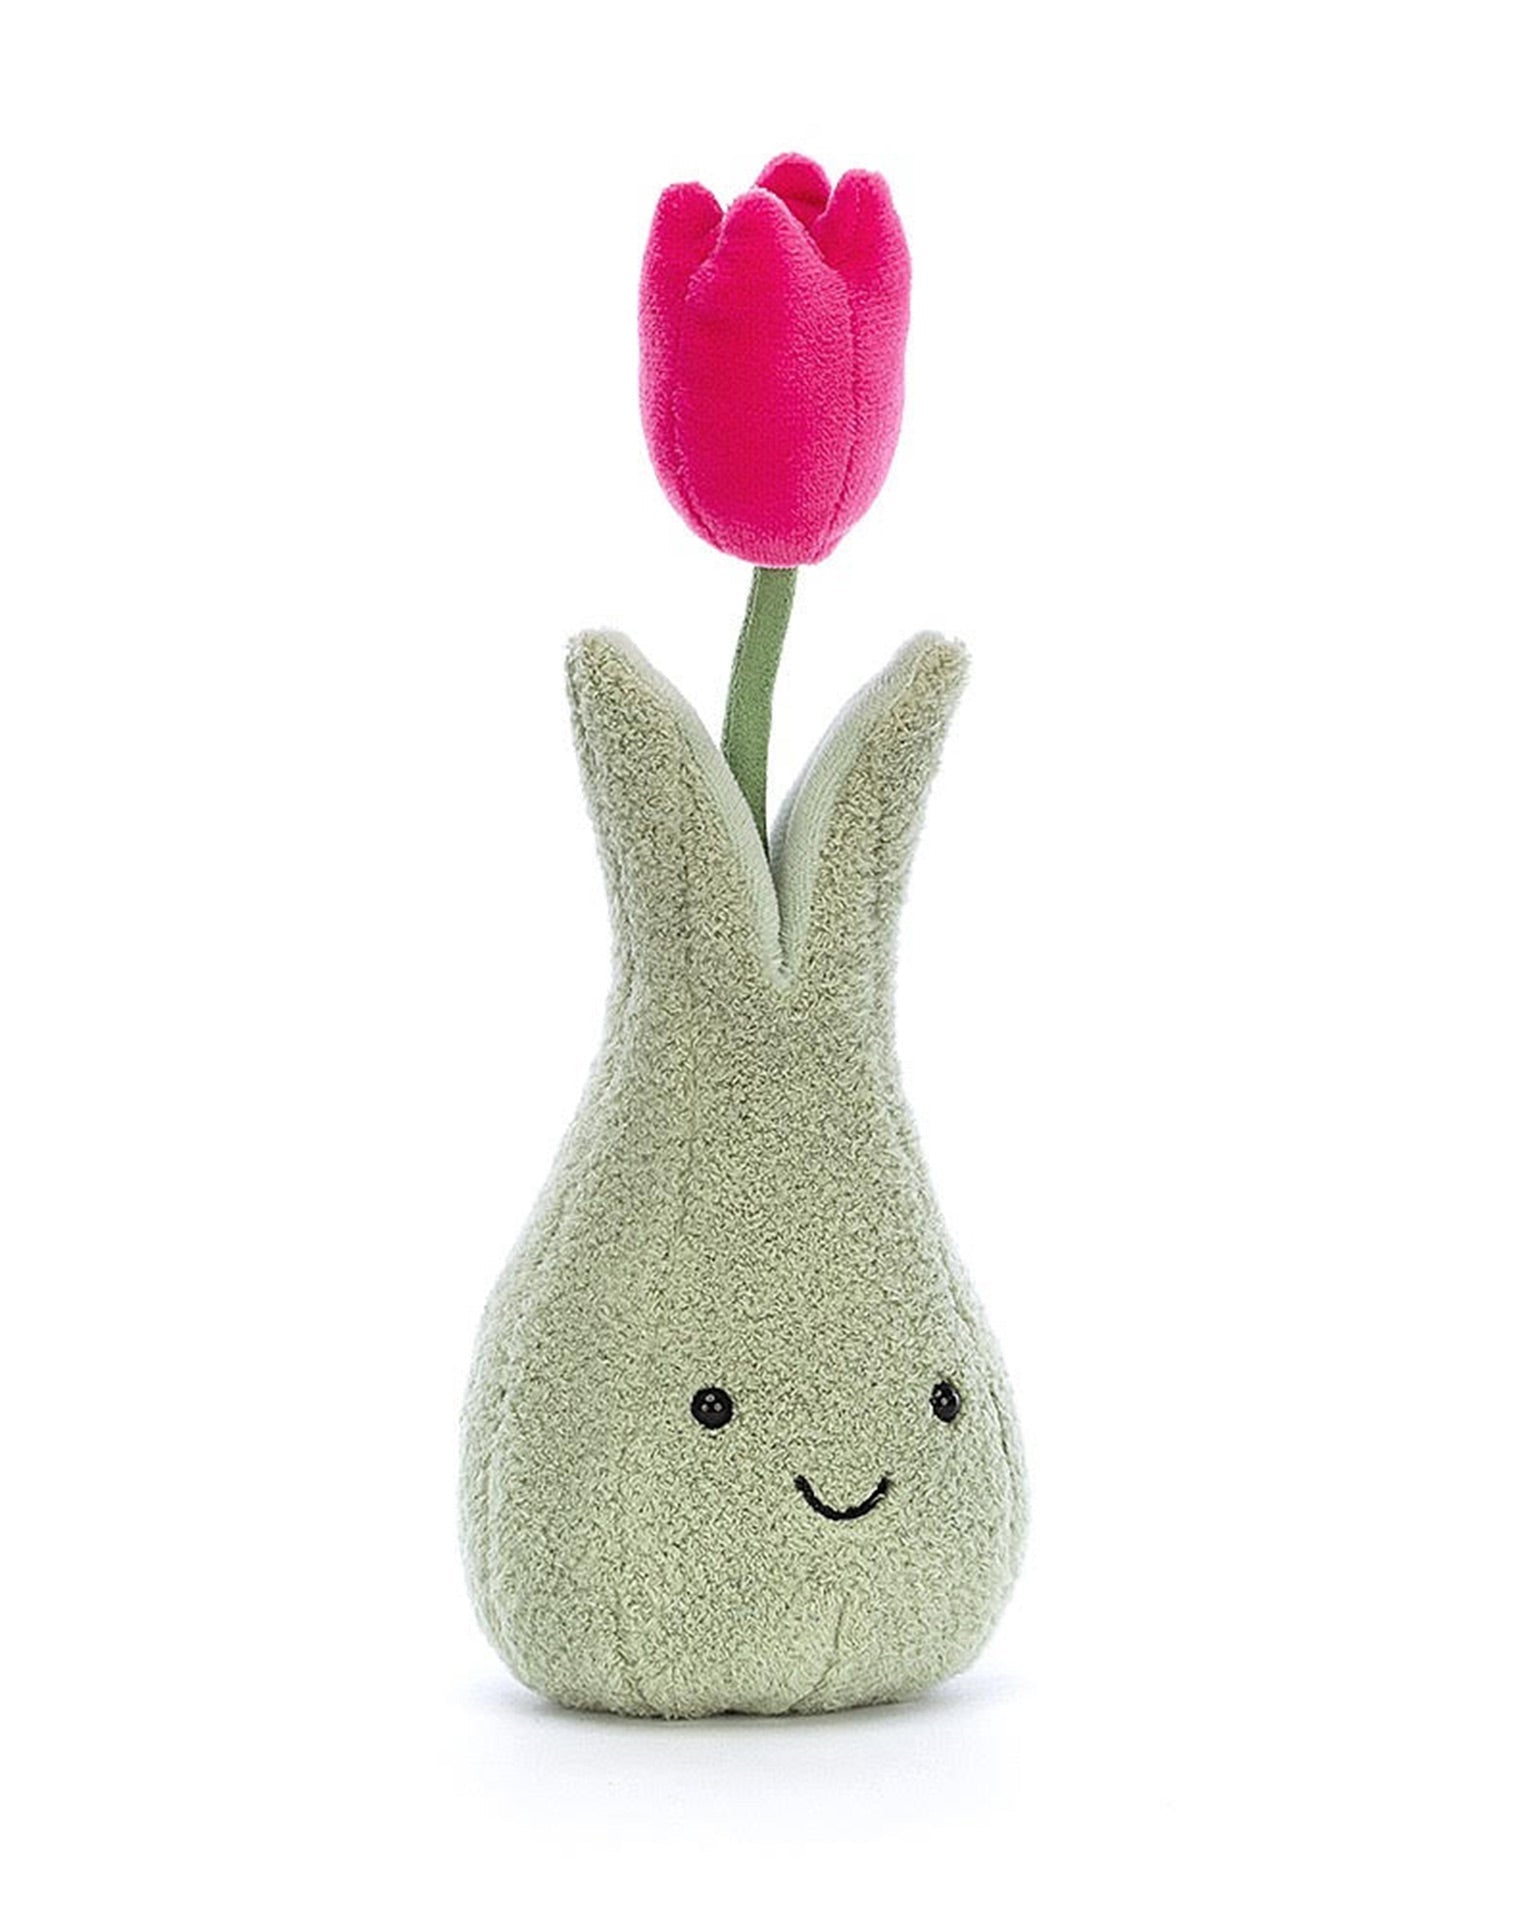 Little jellycat play sweet sprouting fuchsia